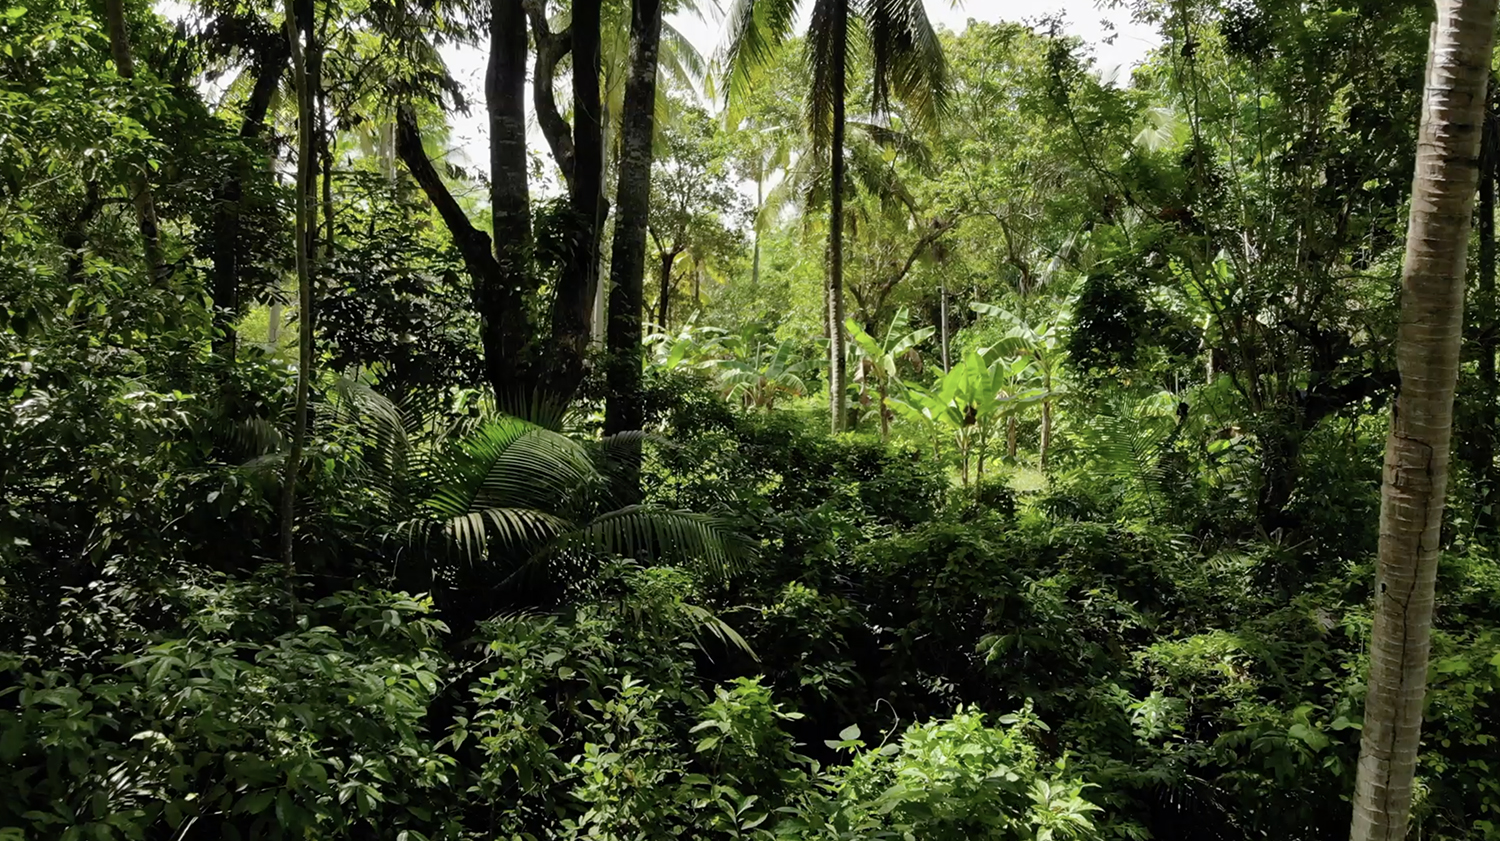 Tropical Forests in Our Daily Lives